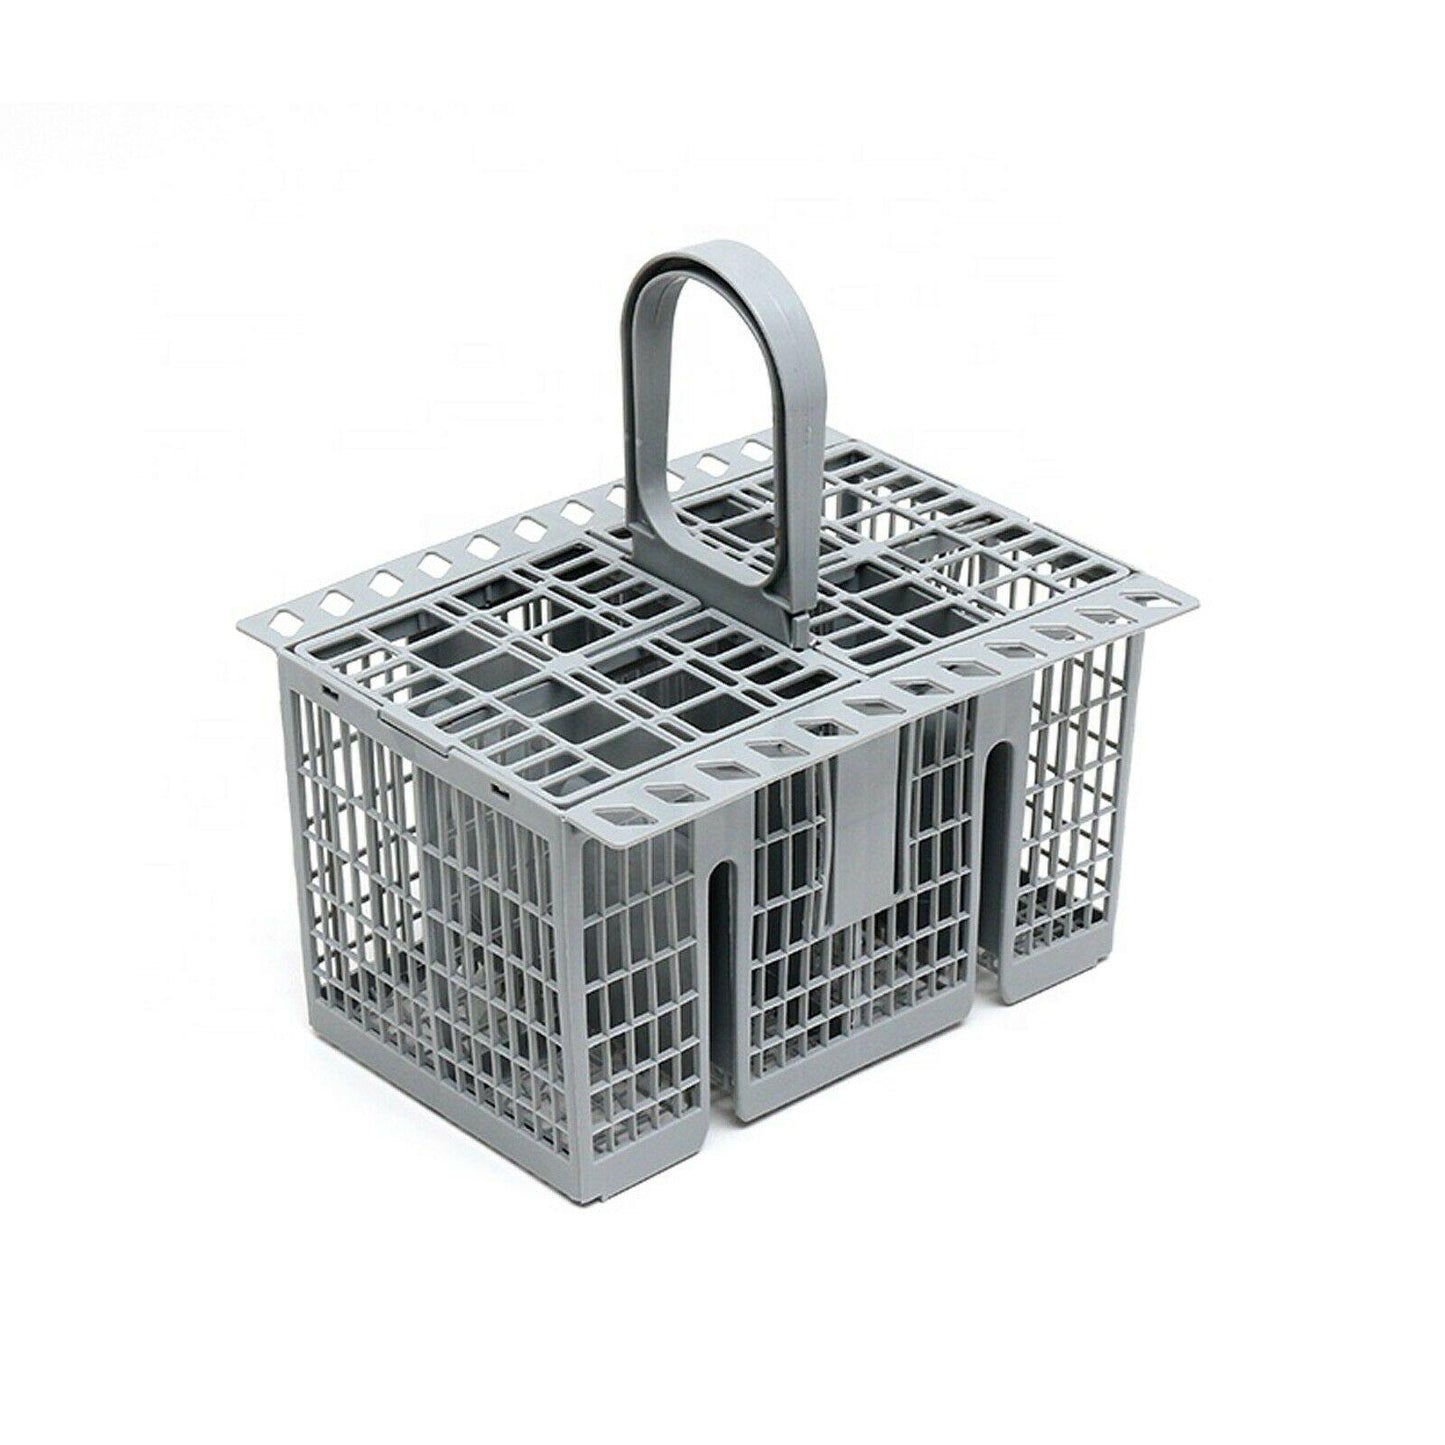 Dishwasher Cutlery Basket Cage with handle For Bosch 668270 11018806 00418280 Sparesbarn